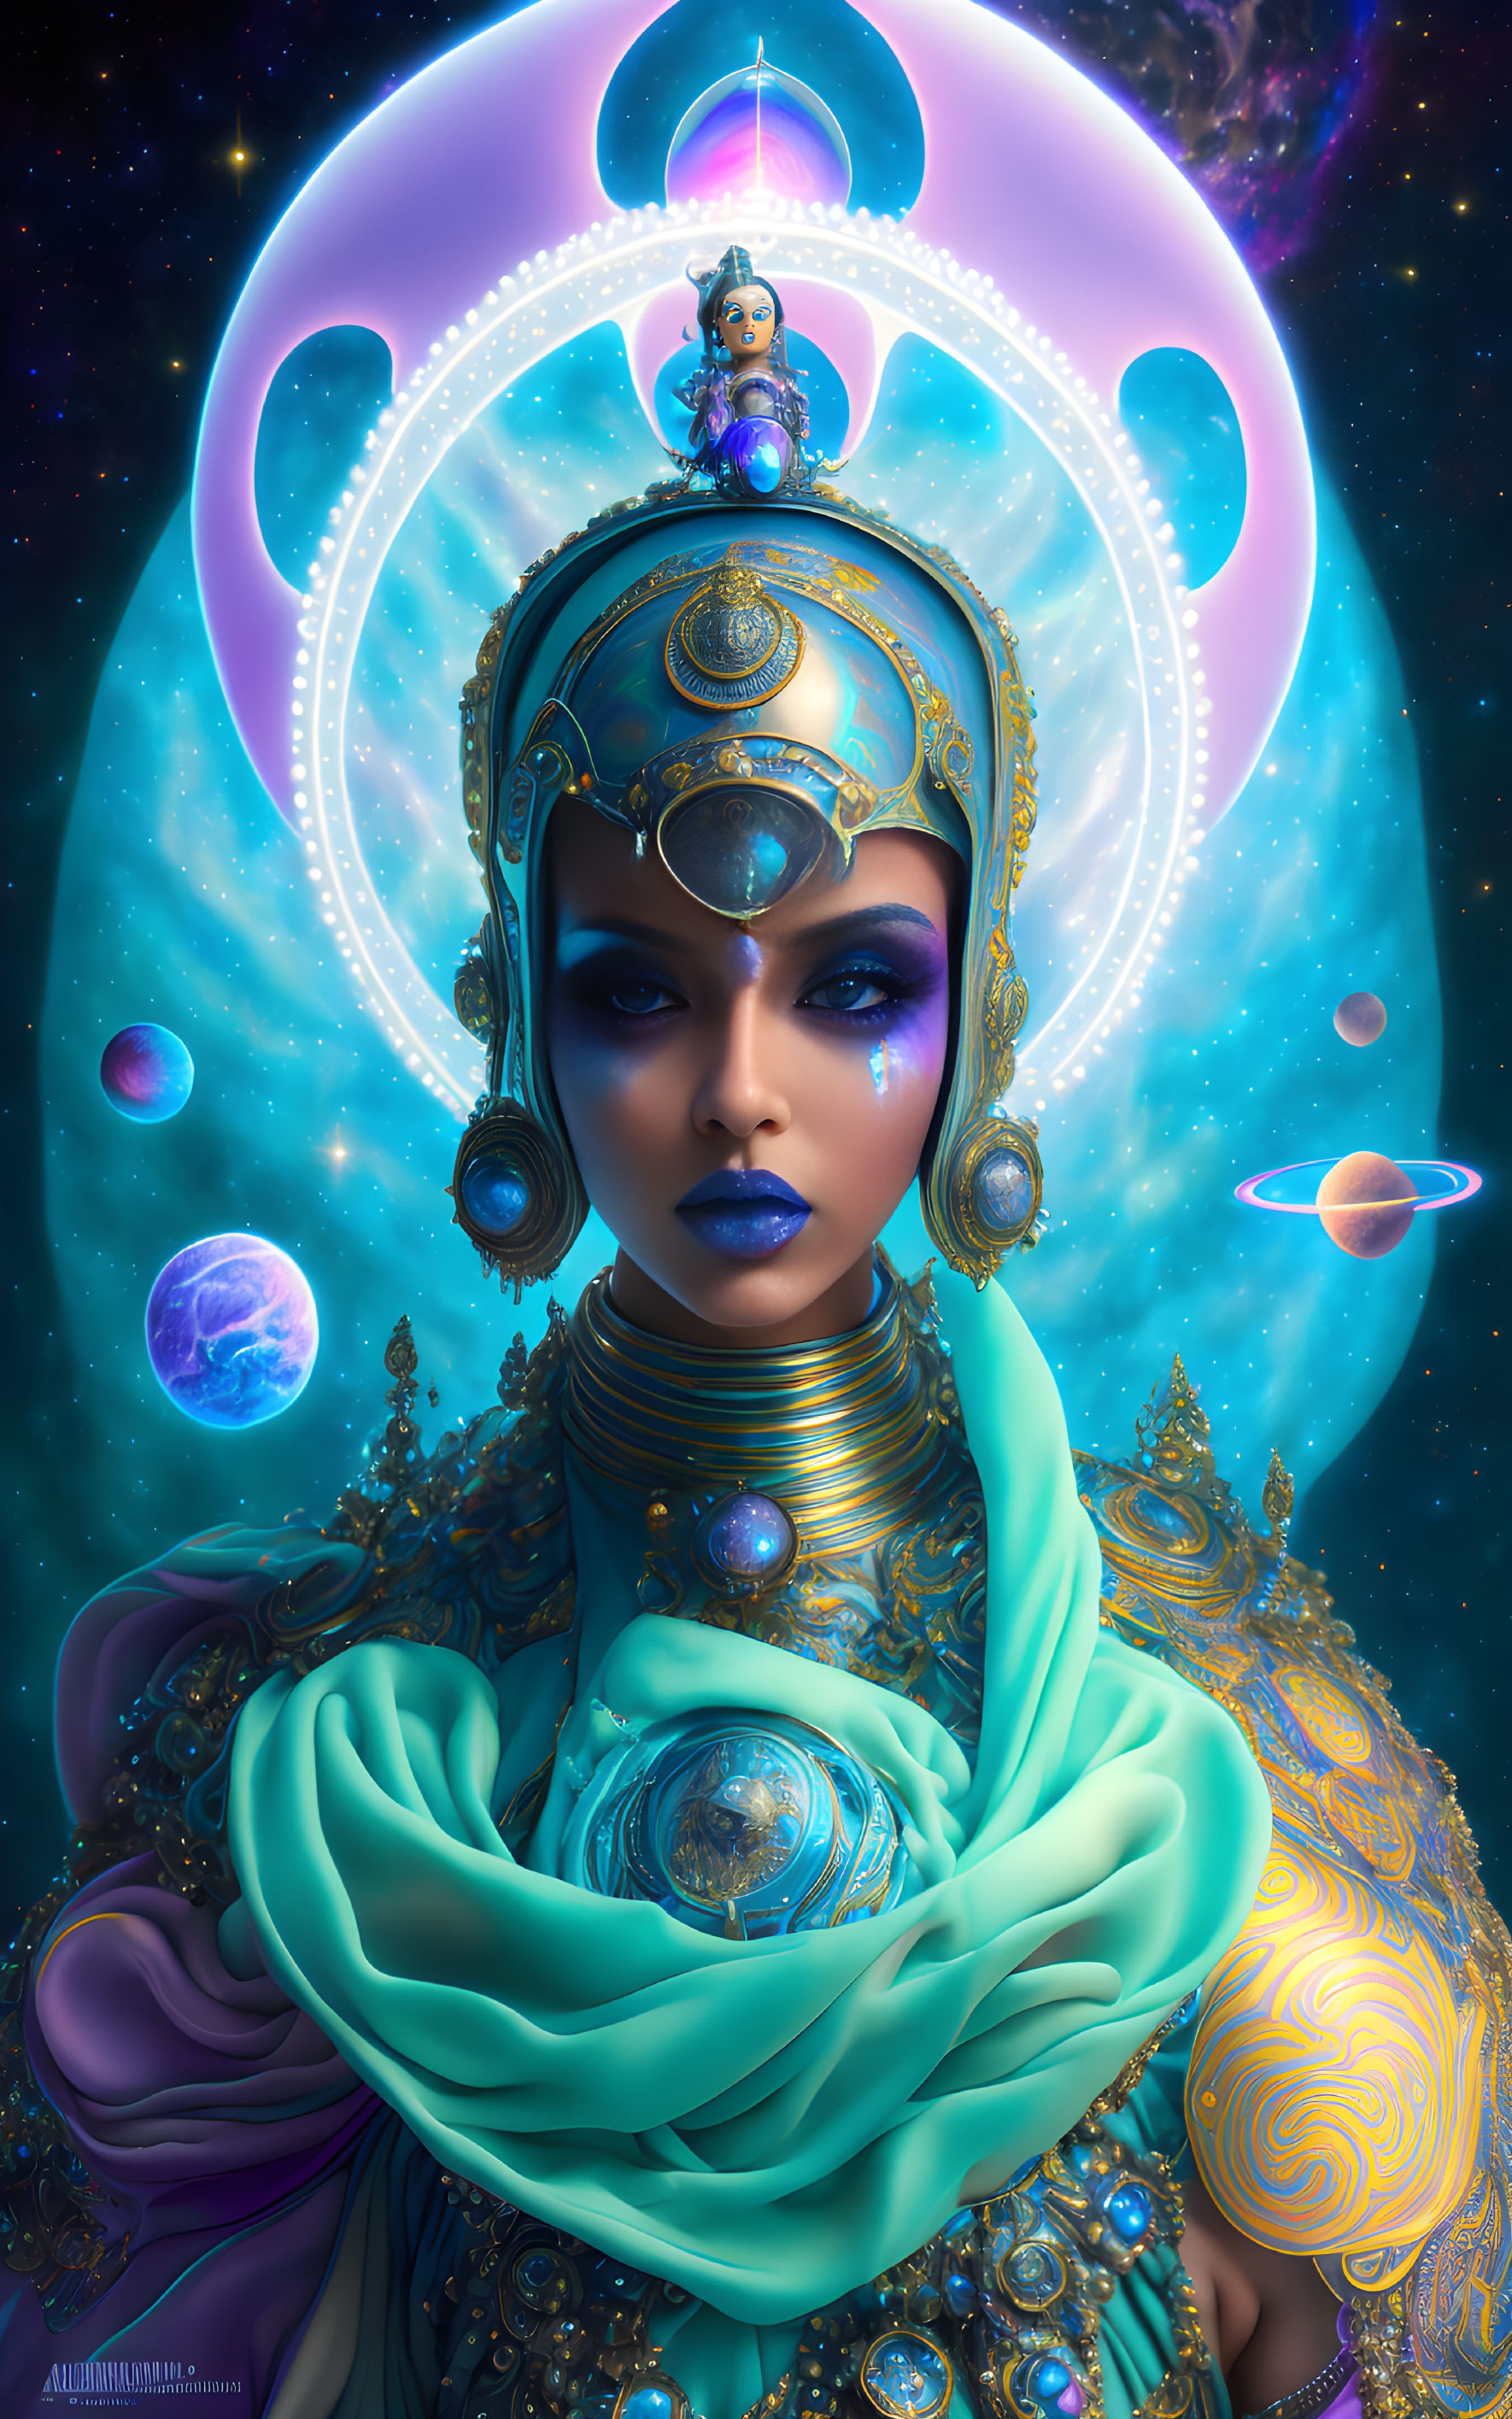 Celestial-themed artwork with figure in cosmic attire and galaxy backdrop